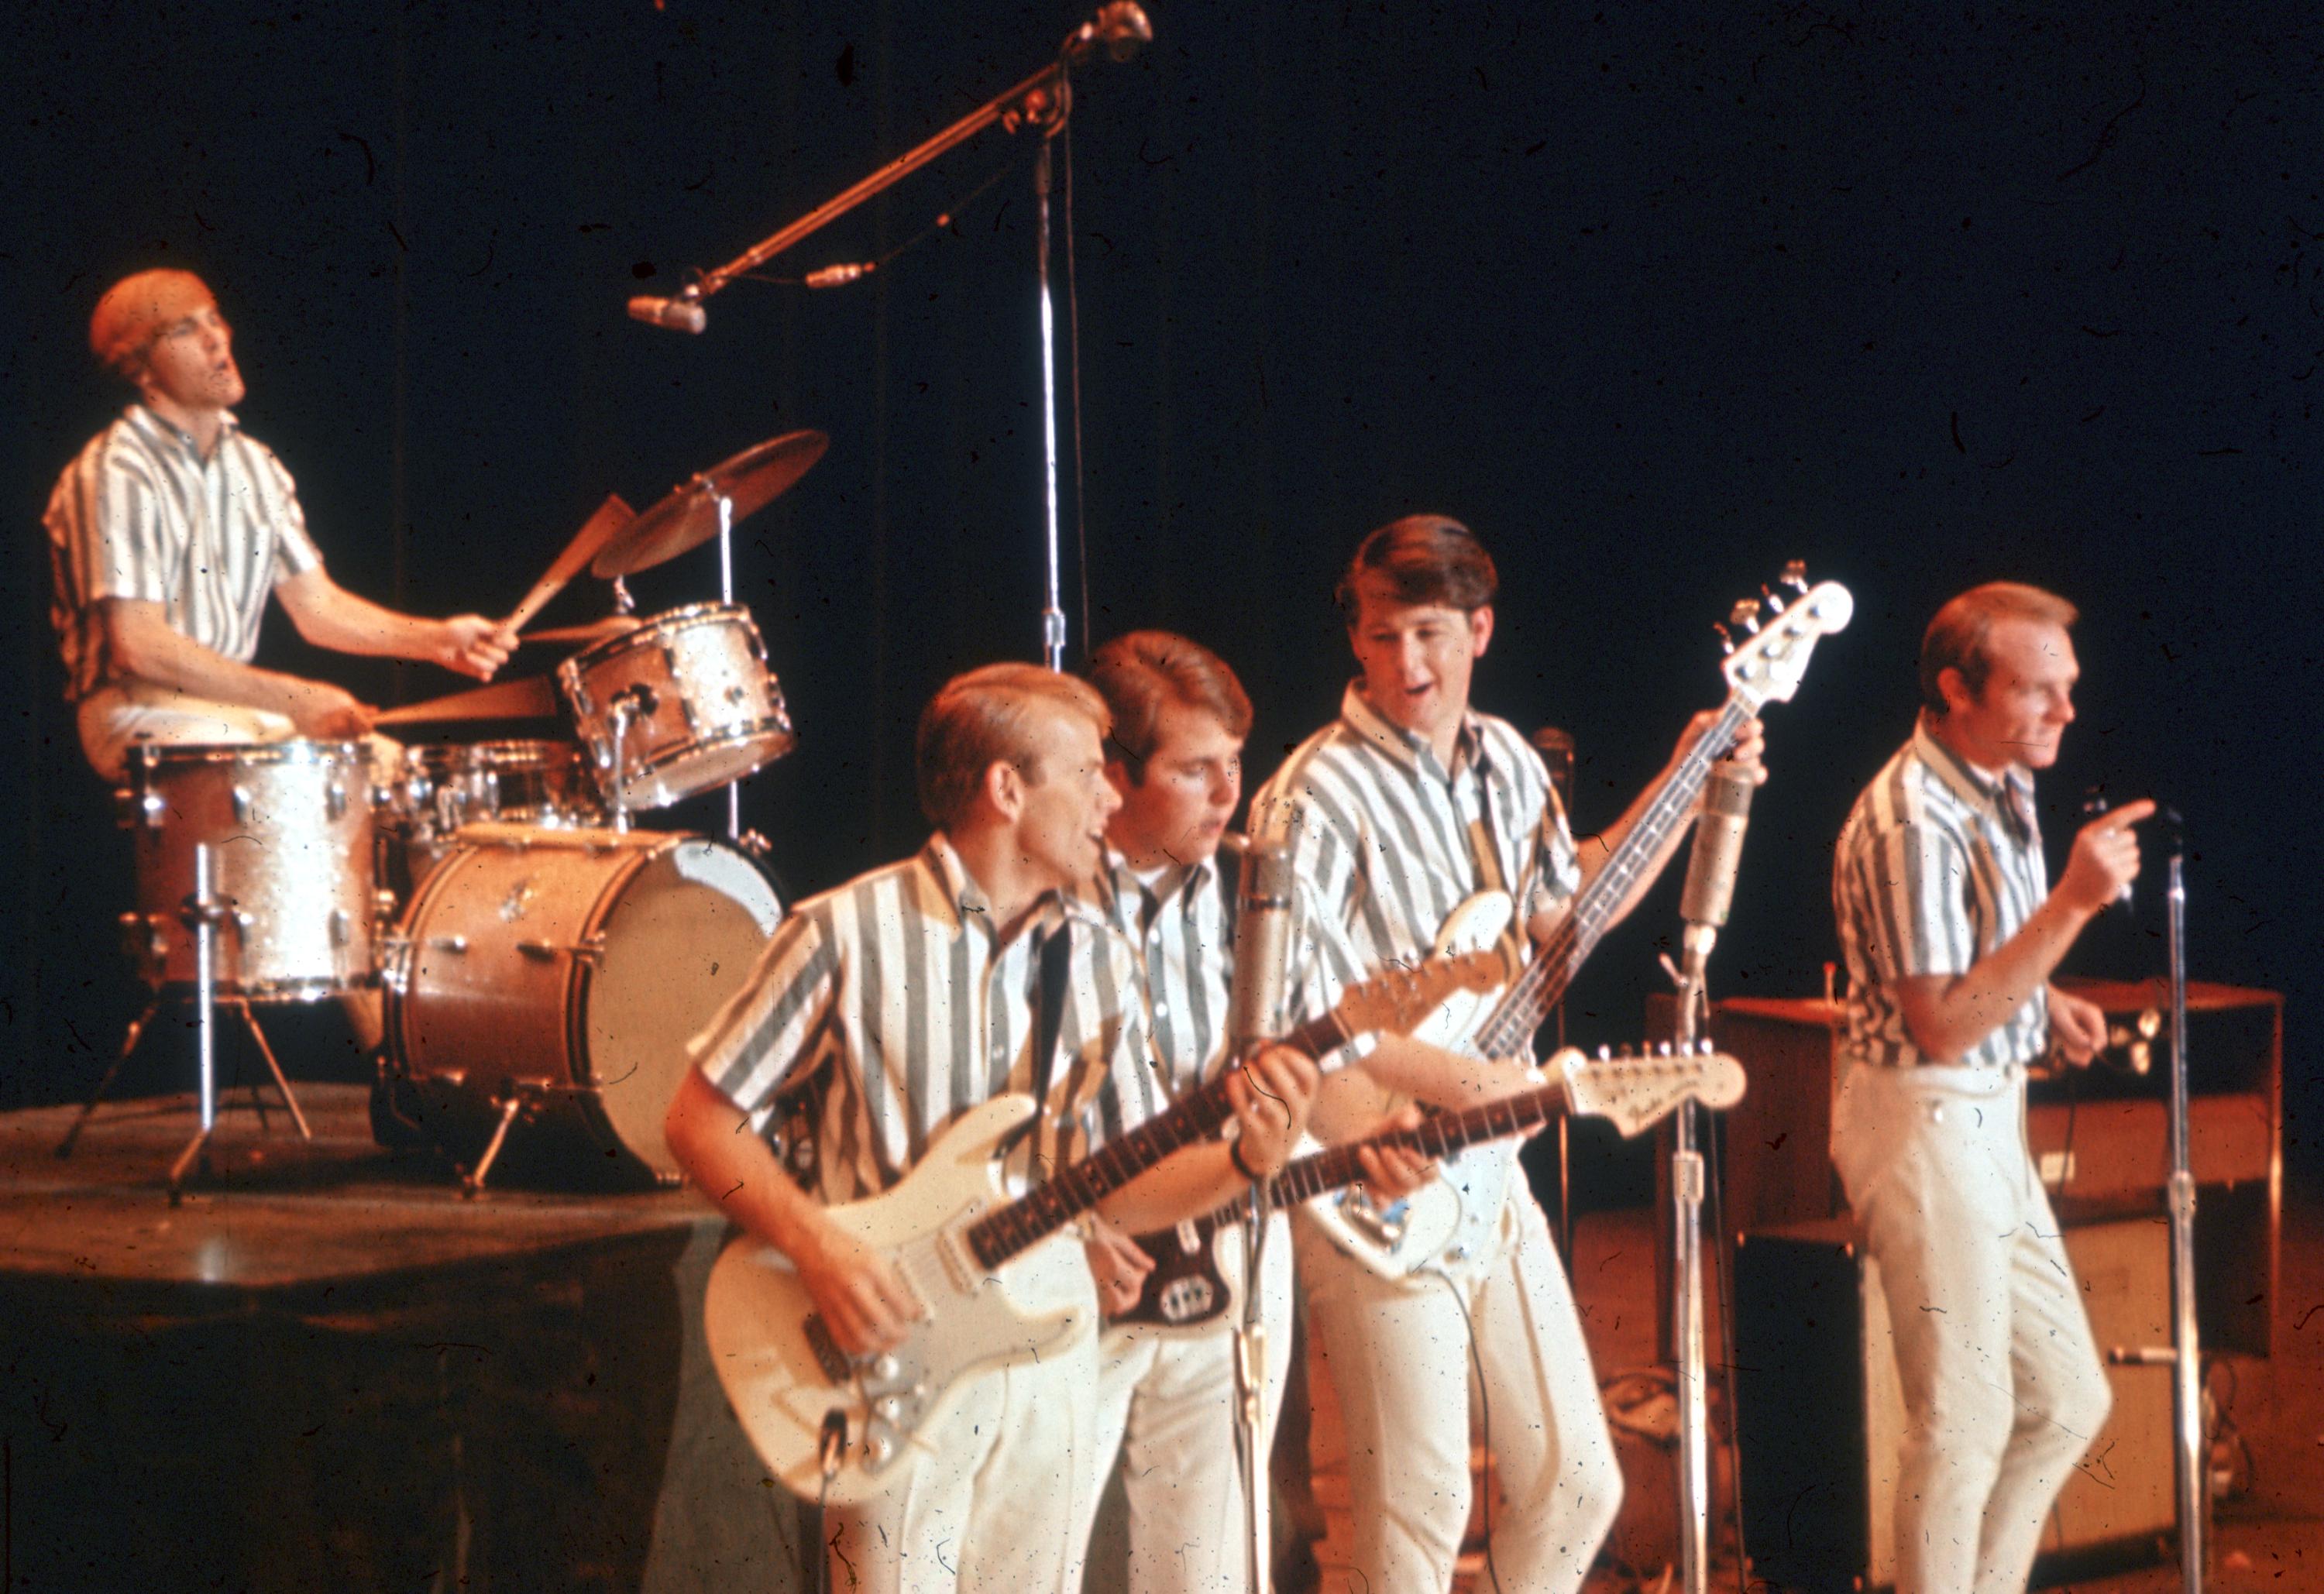 Rock and roll band The Beach Boys perform on stage in 1964 (Dennis Wilson, Al Jardine, Carl Wilson, Brian Wilson, Mike Love)